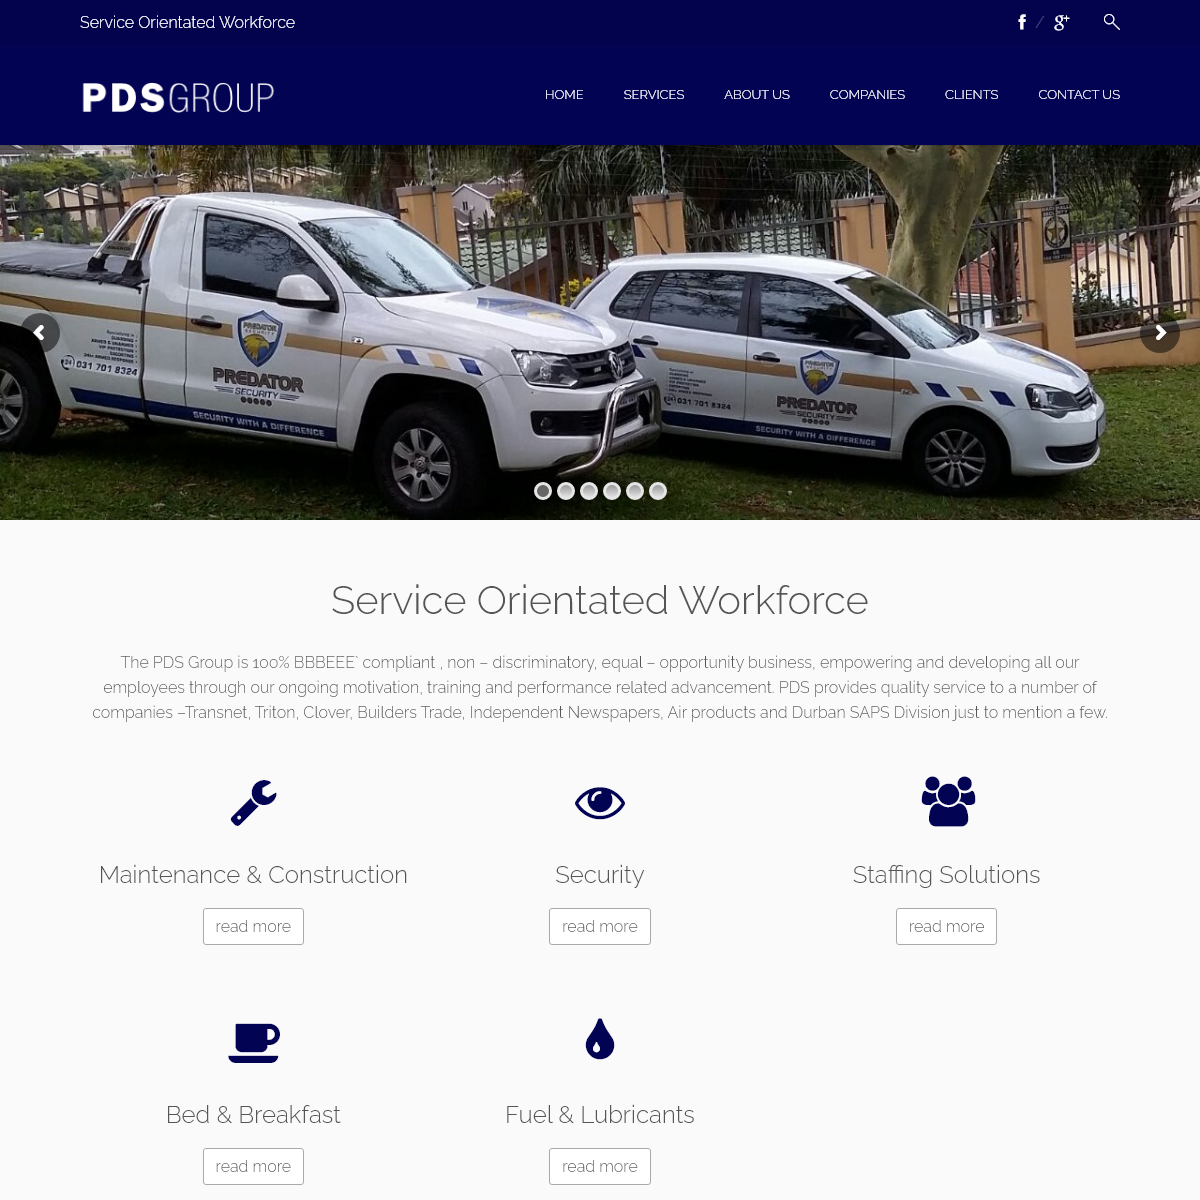 A complete backup of thepdsgroup.co.za